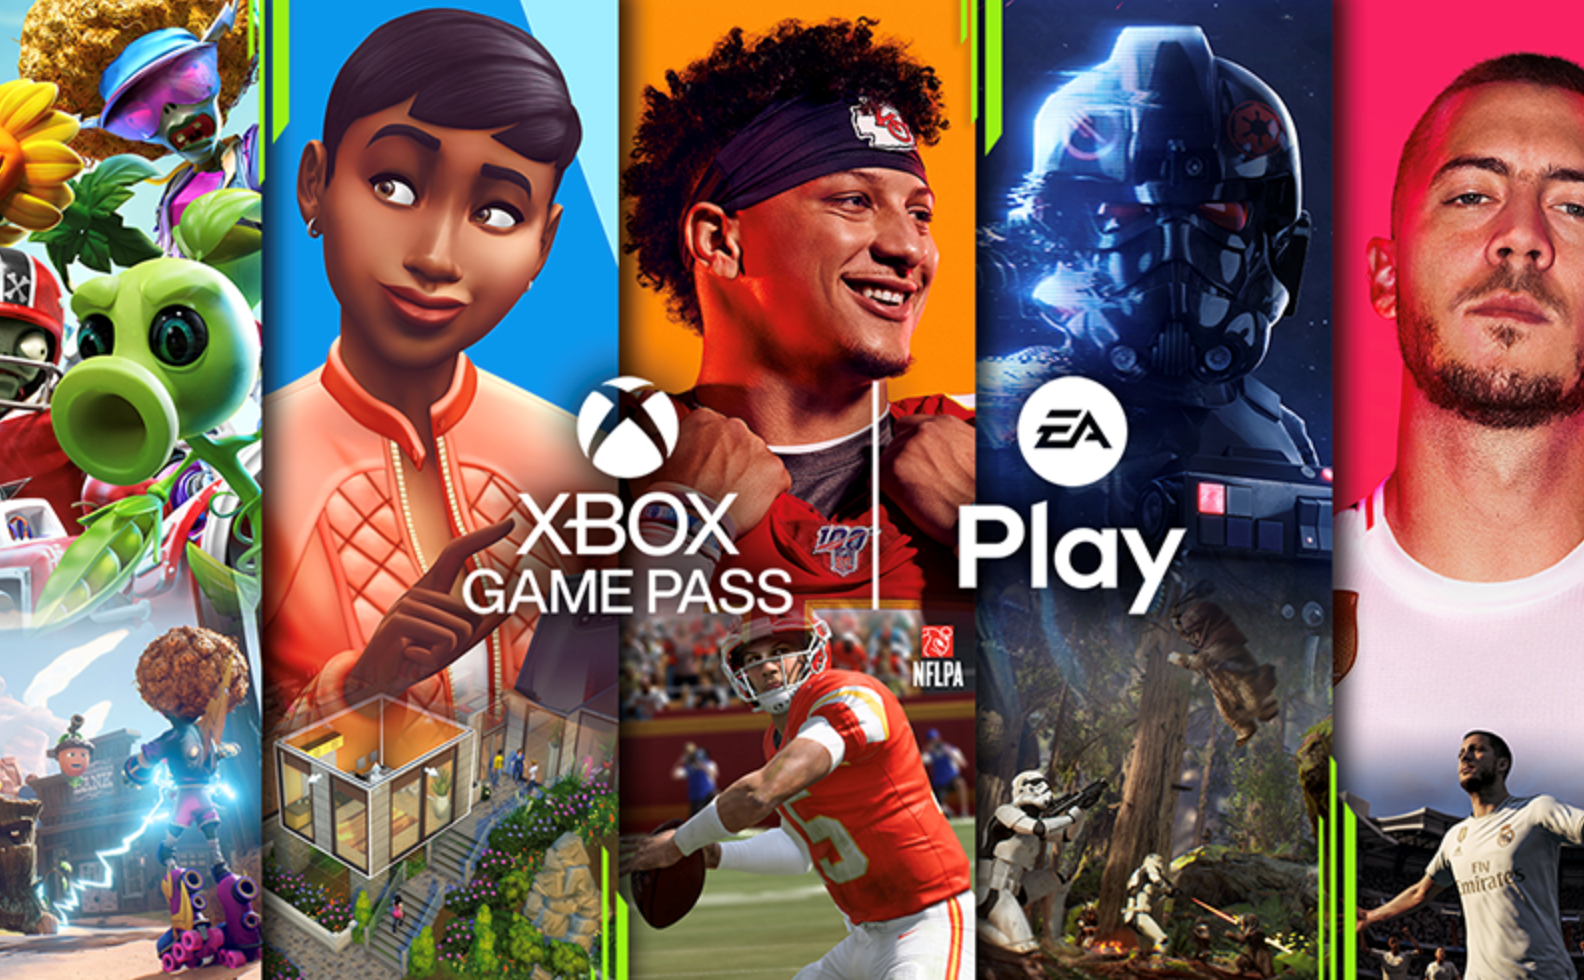 Play game отзывы. Xbox game Pass. Xbox game Pass Ultimate. Xbox game Pass Ultimate EA Play. Xbox Ultimate Pass игры.